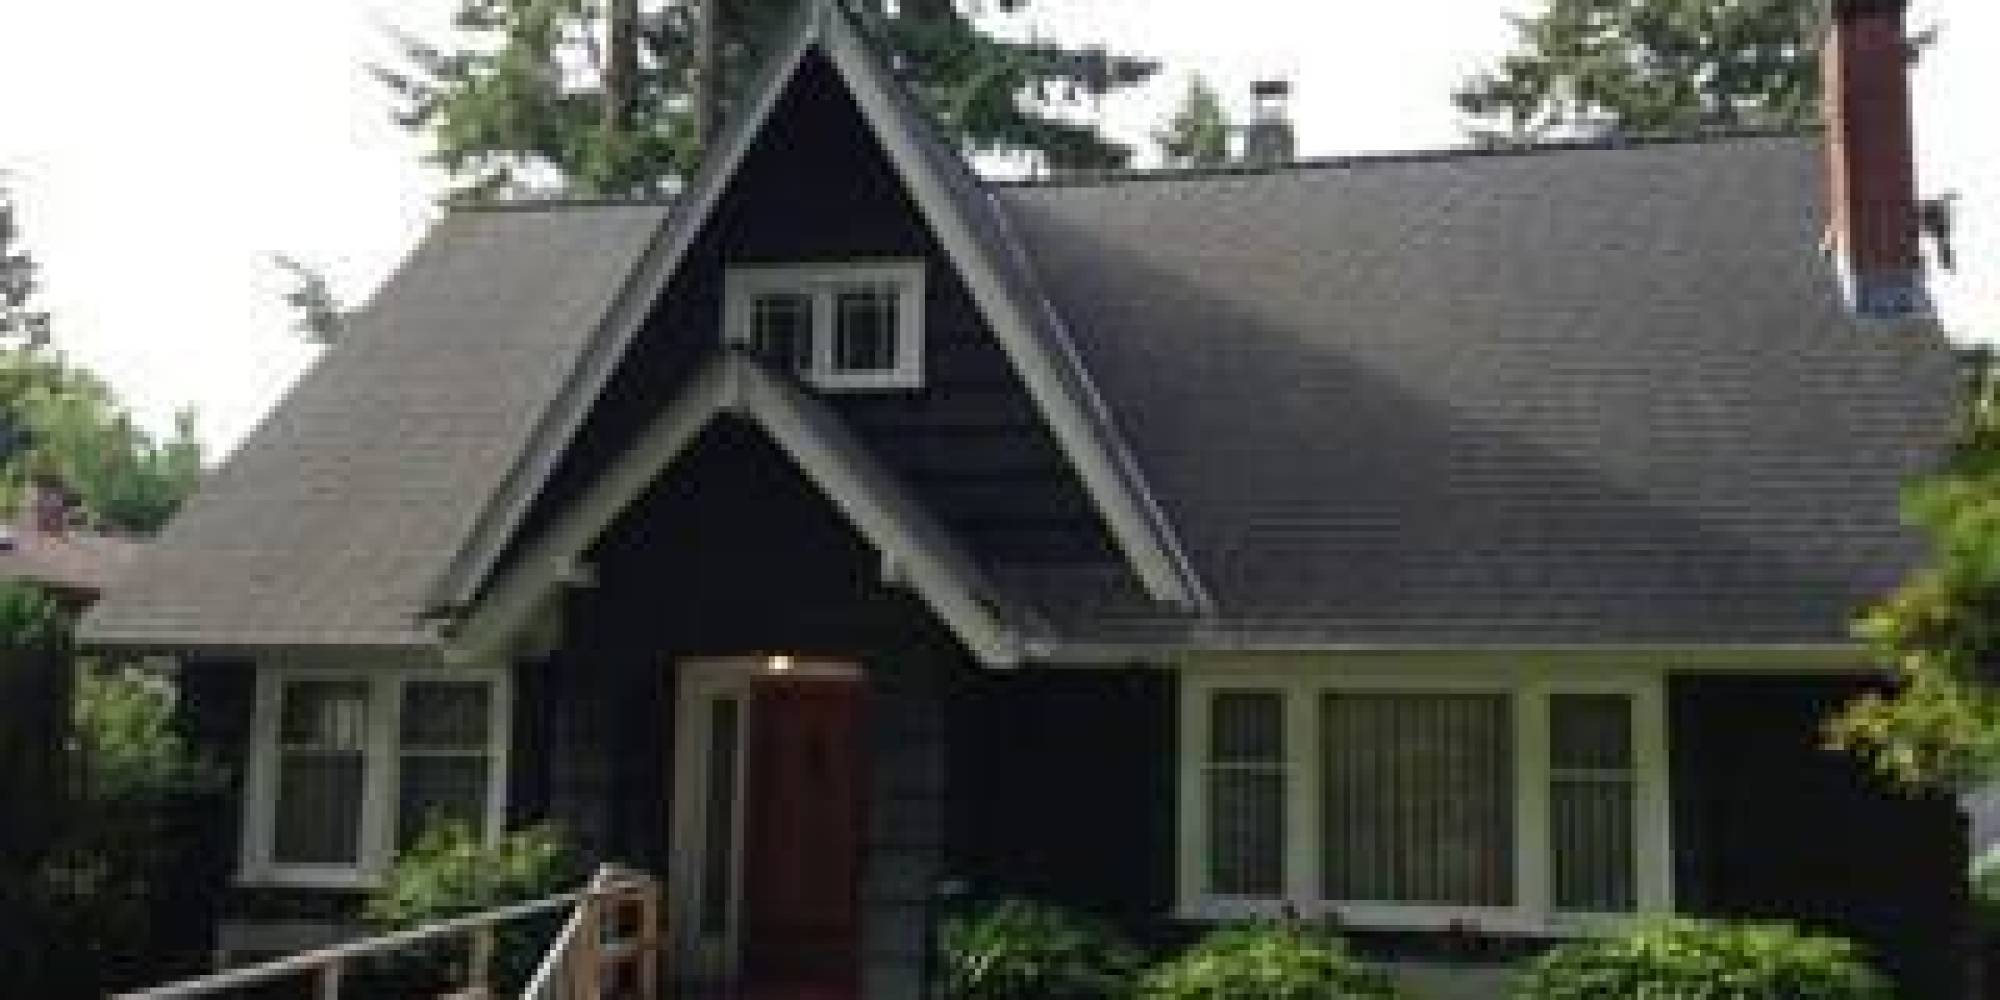 Vancouver House Selling For $1 On Craigslist